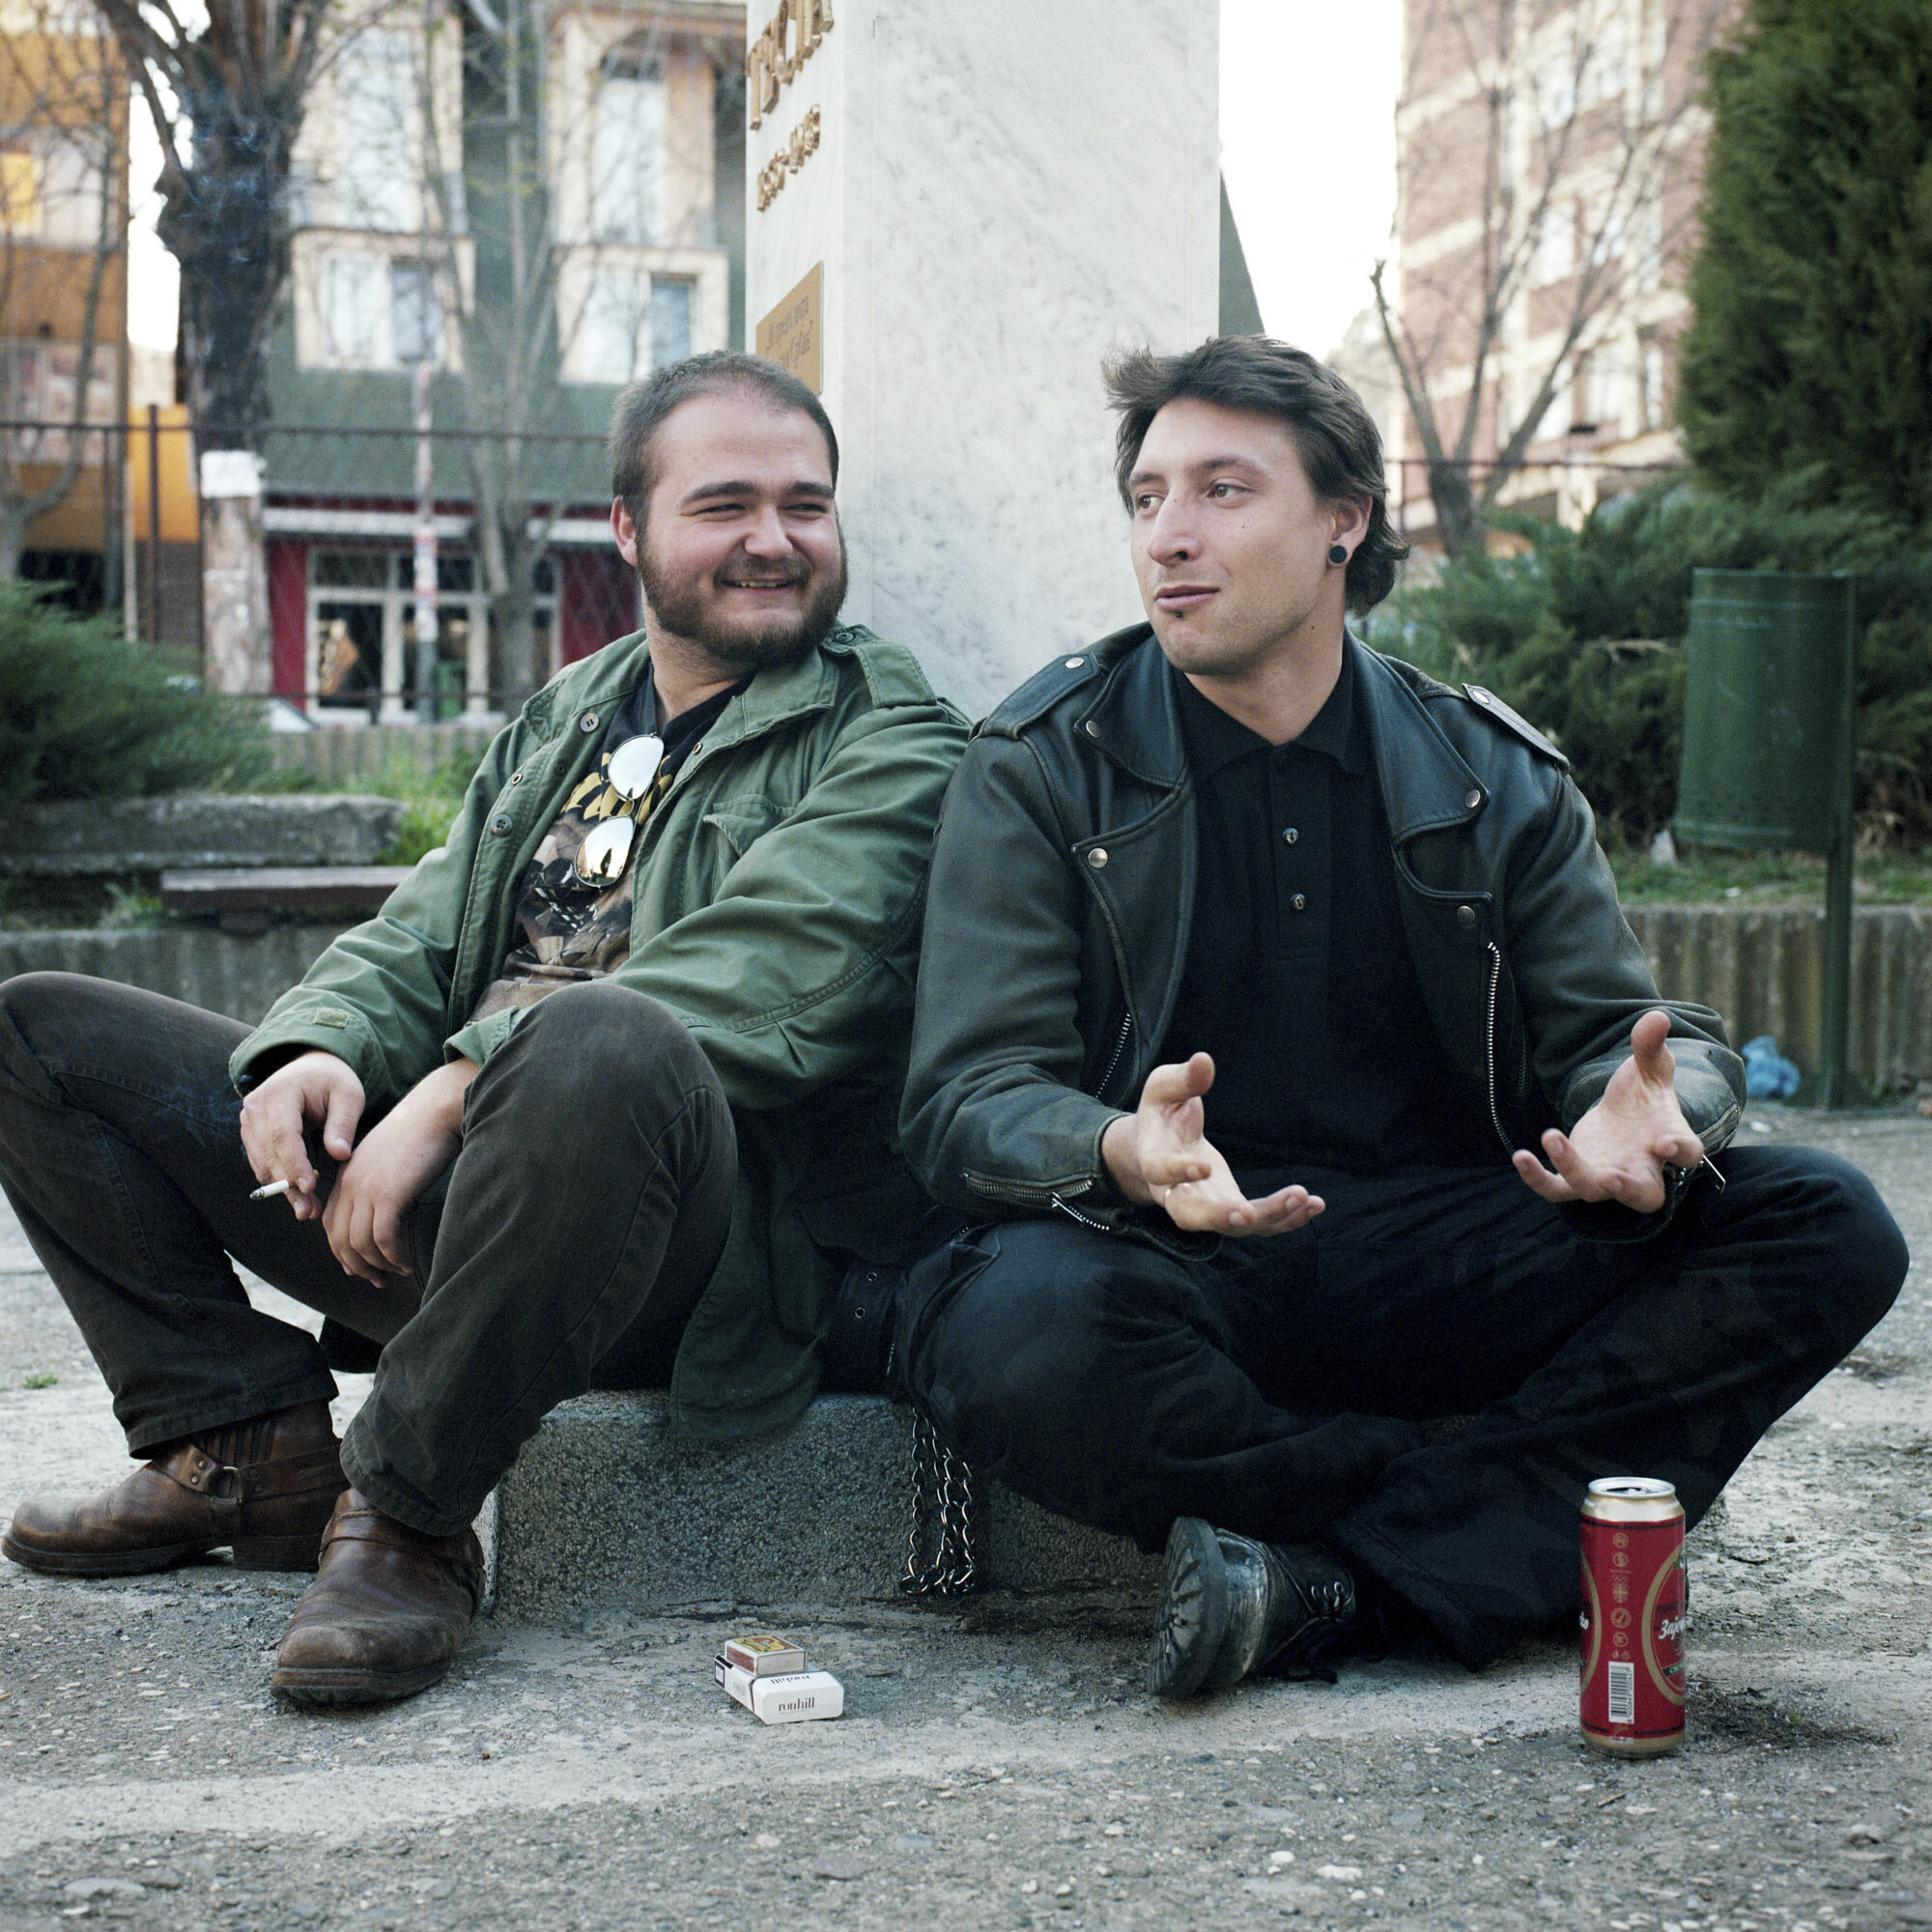  After rehearsals with their death metal band, Alem (on the right) and Boris (on the left),  two young rockers who live in the Serbian part of Mitrovica, drink beers and smoke cigarettes in a public park. Mitrovica, Kosovo, March 28, 2017. 